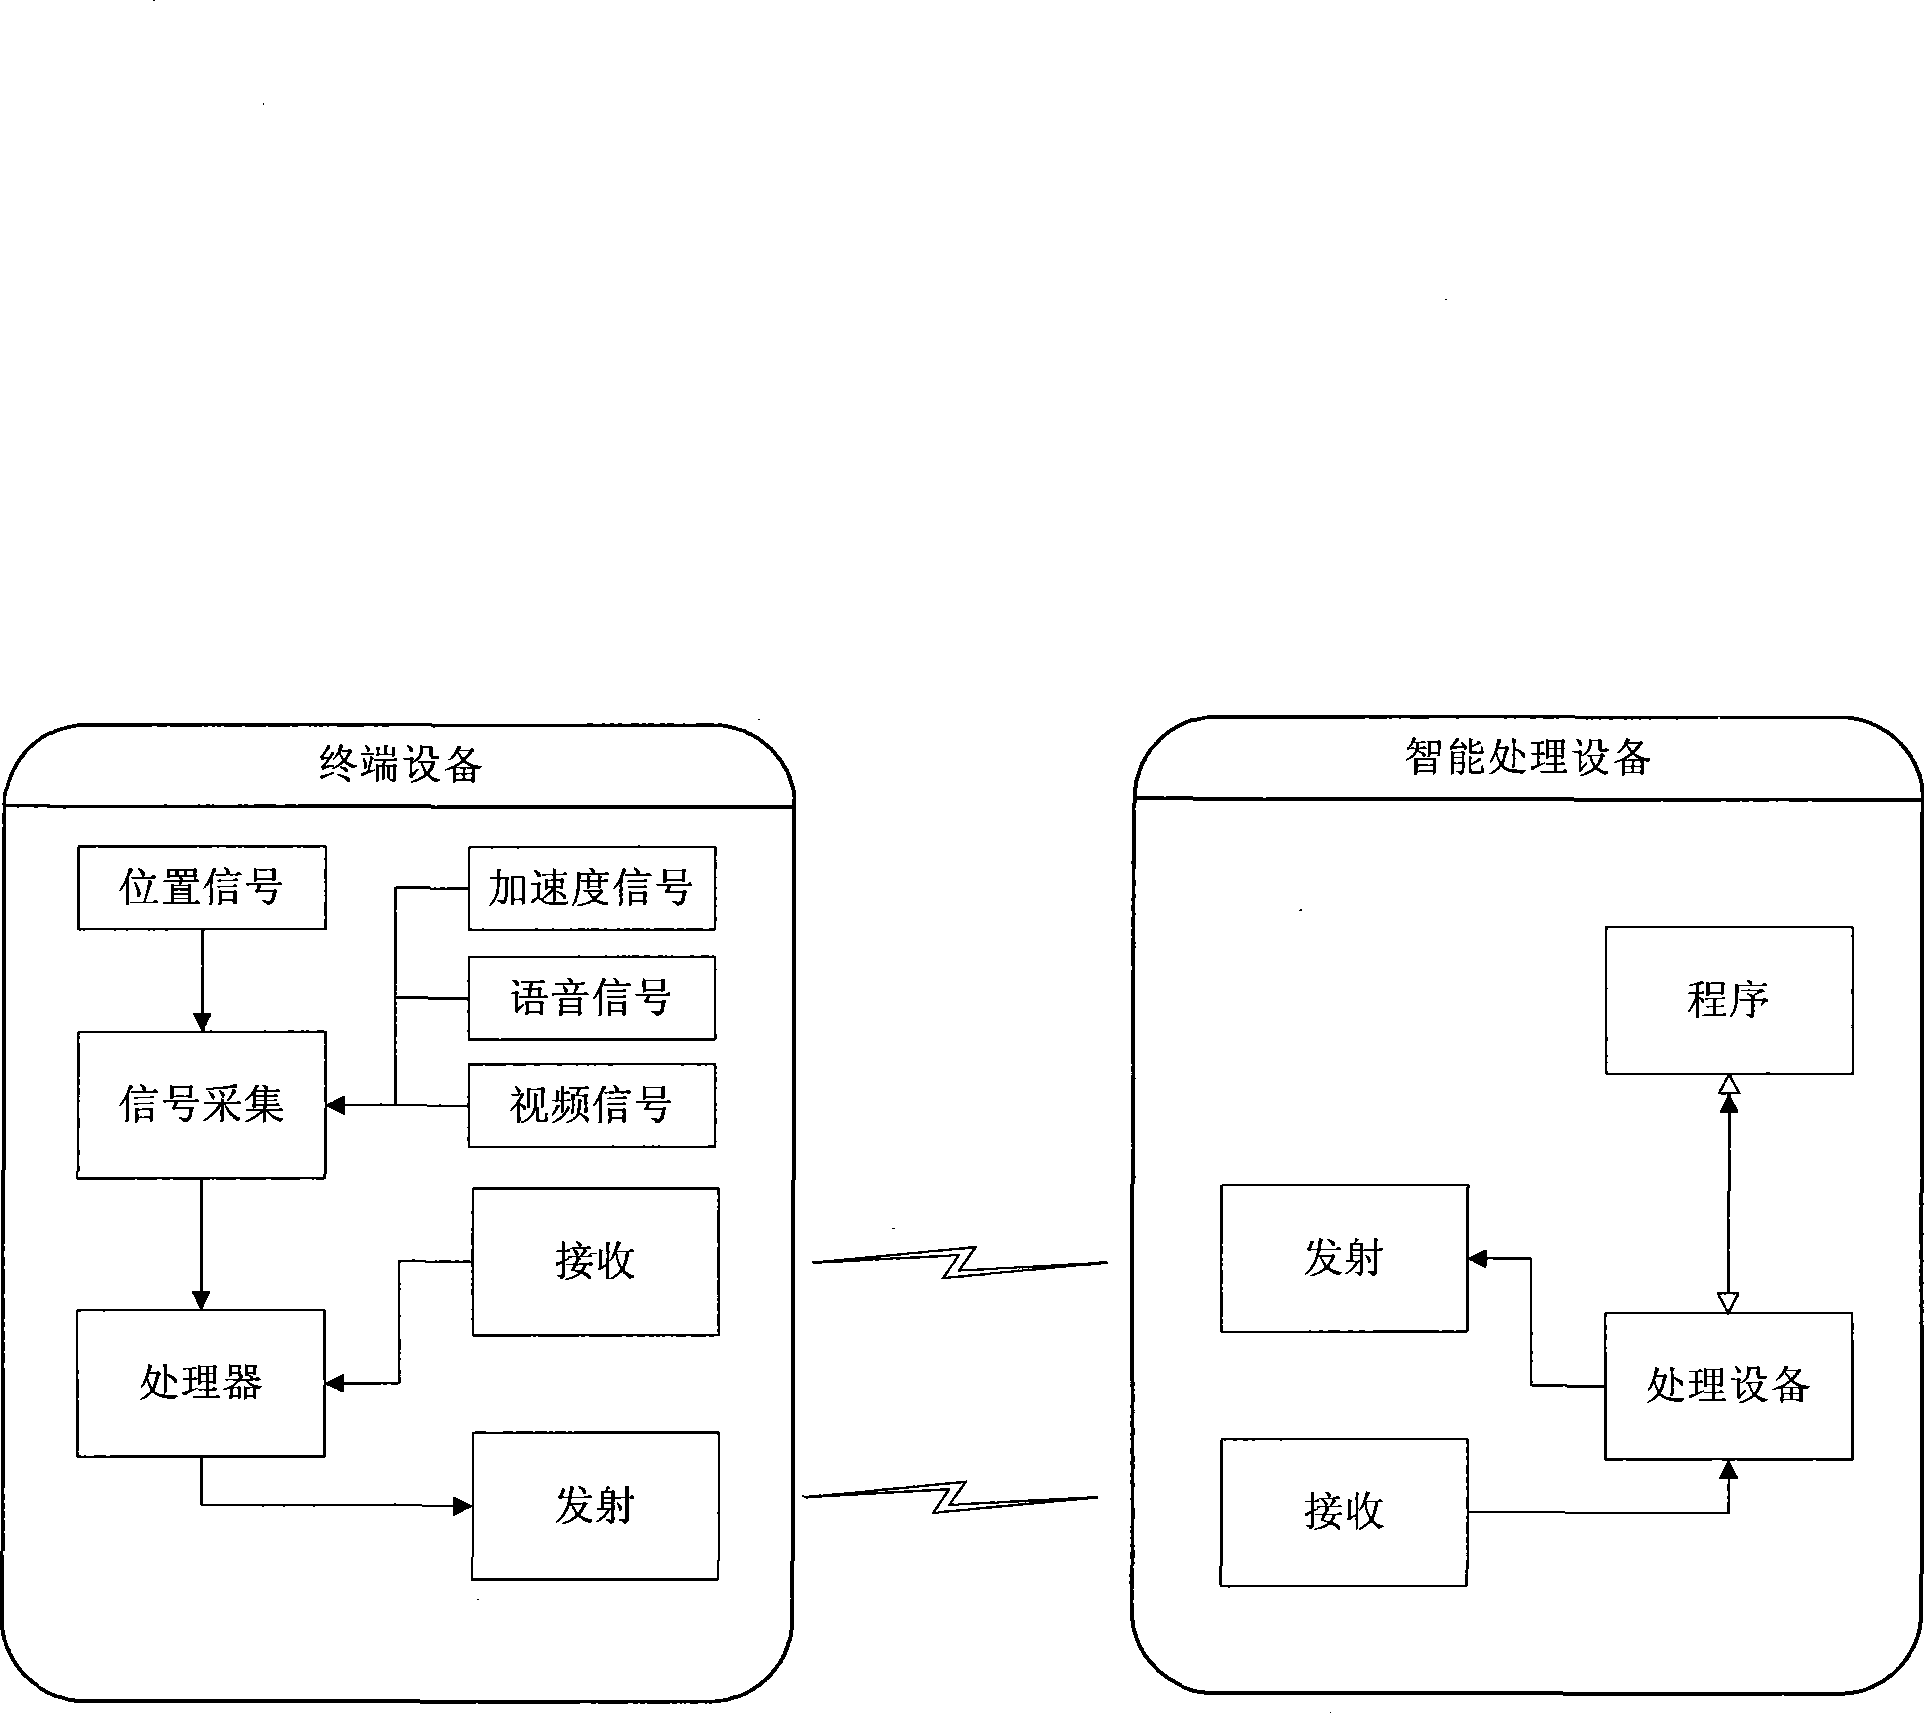 Multiple-signal input and output processor